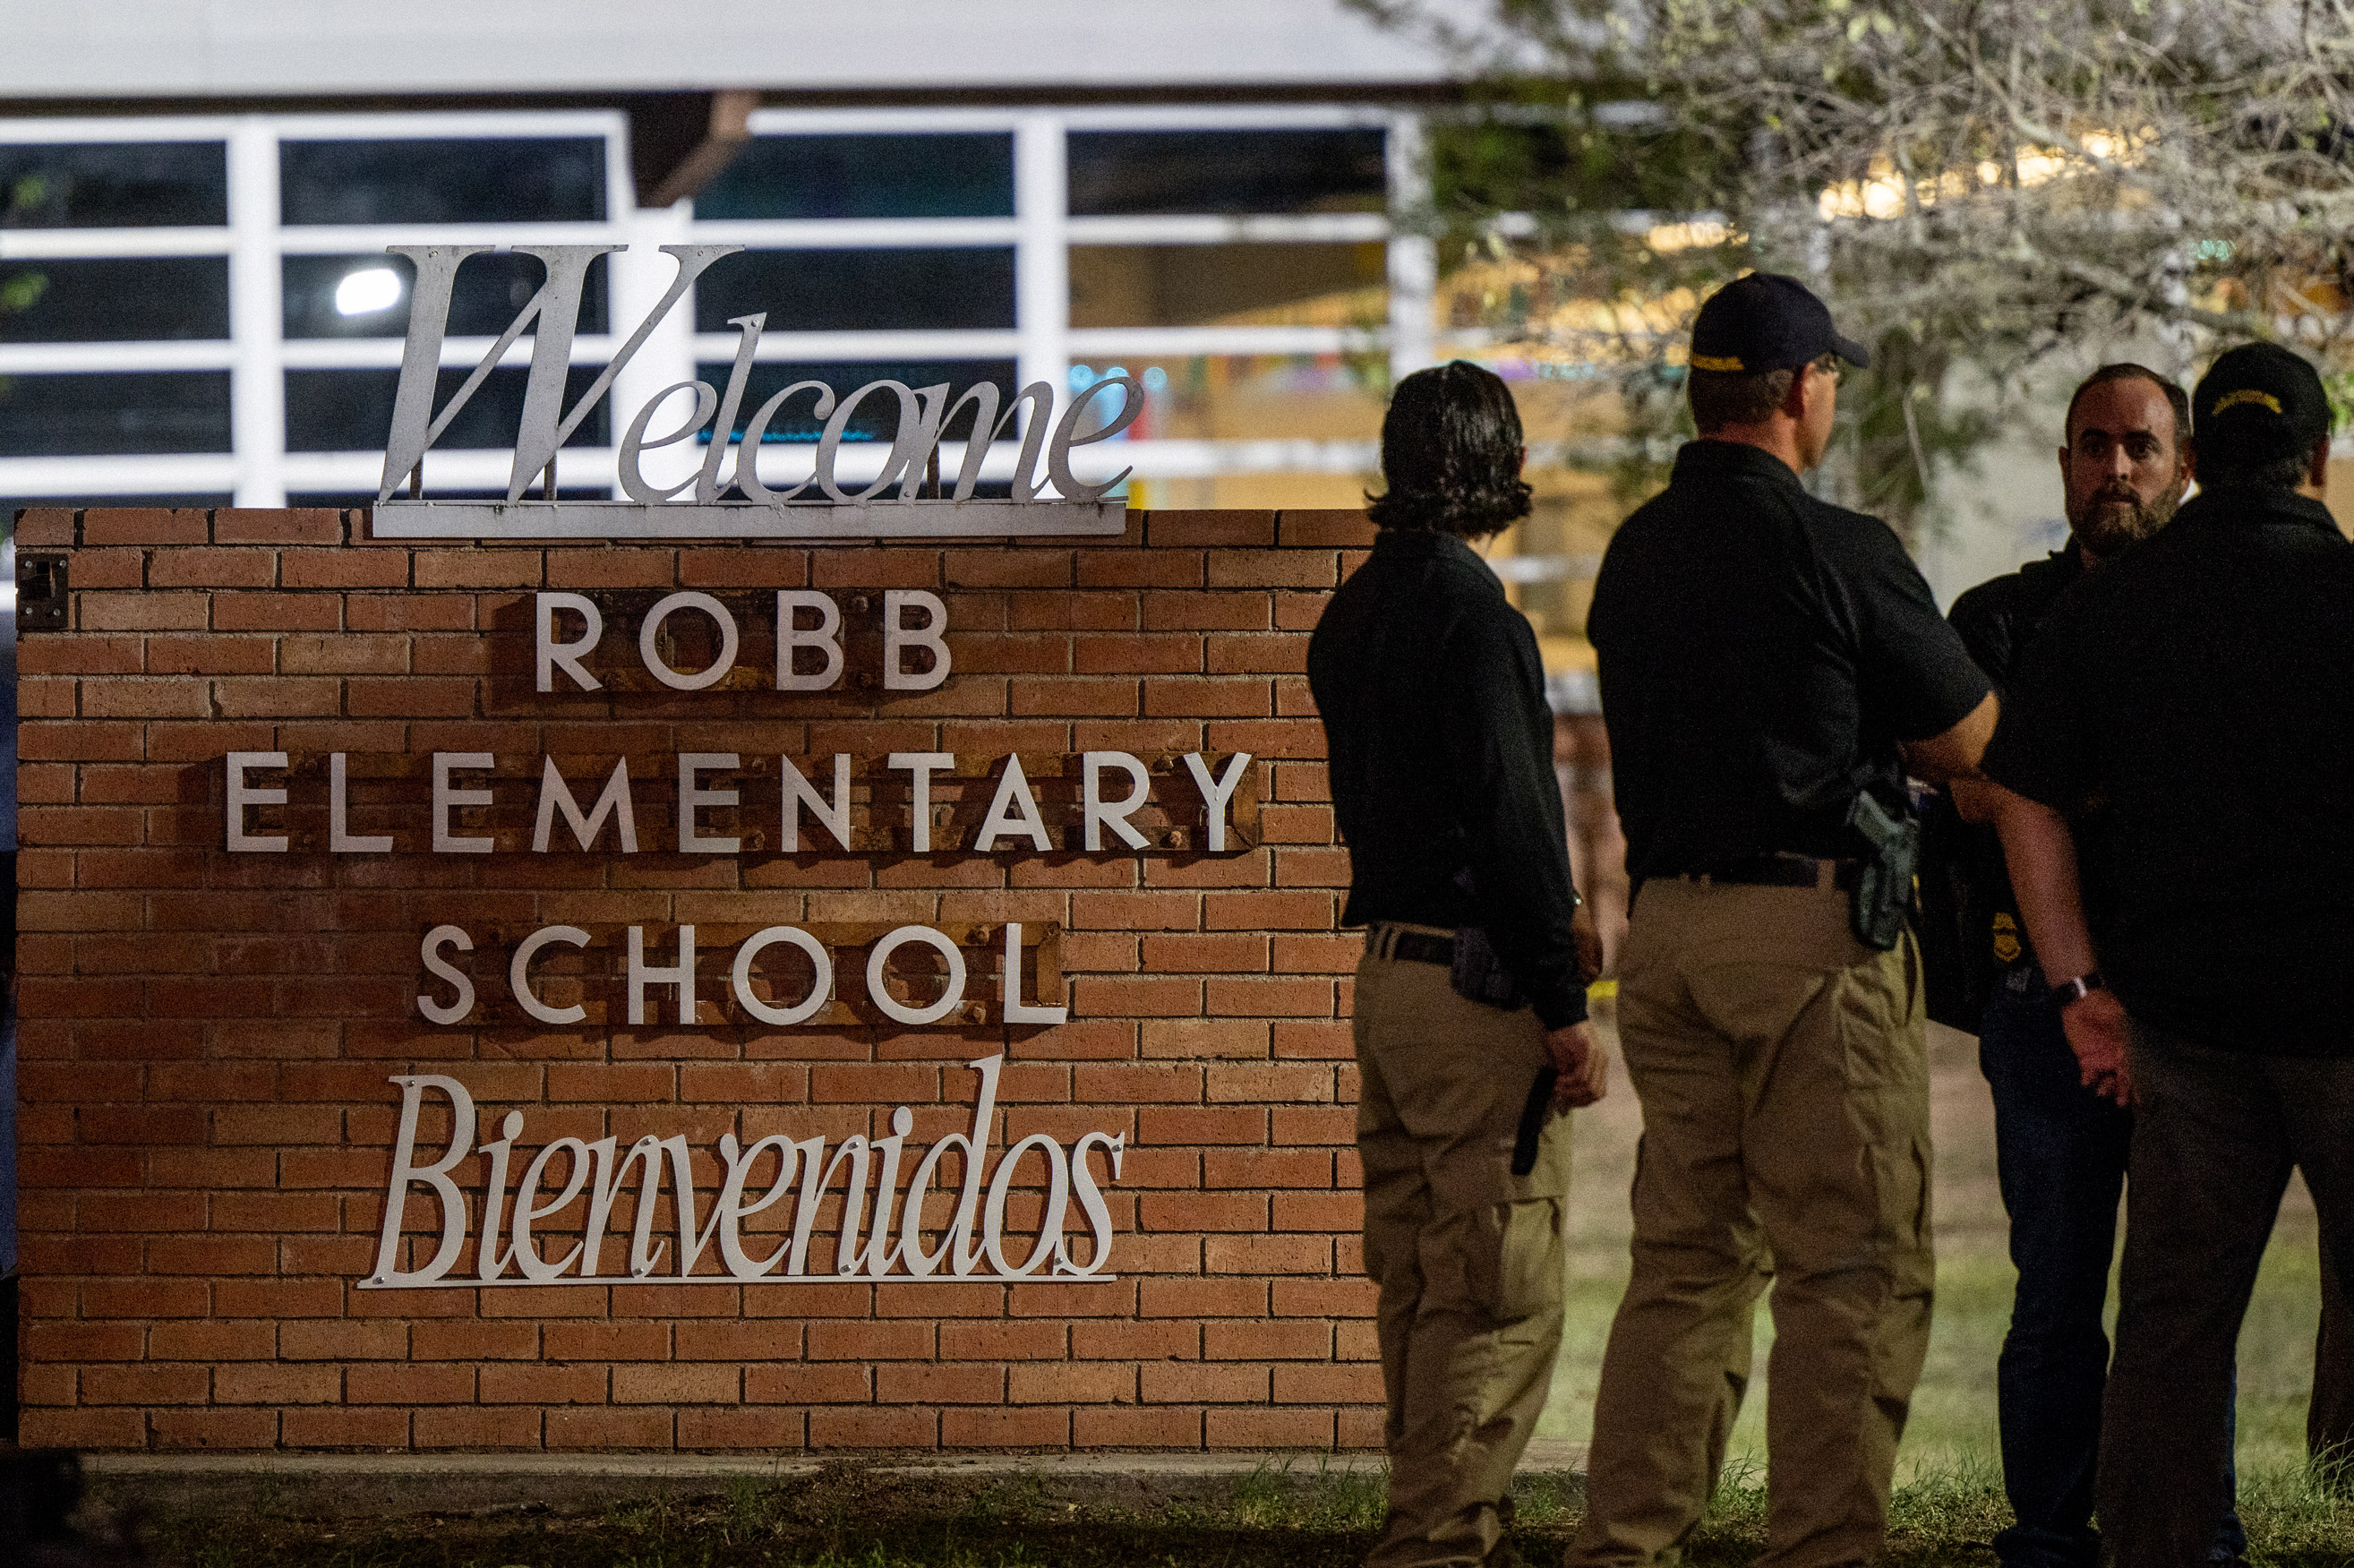 Uvalde Texas school shooting: What we know about the Texas elementary  school shooting that left 19 students and 2 teachers dead | CNN